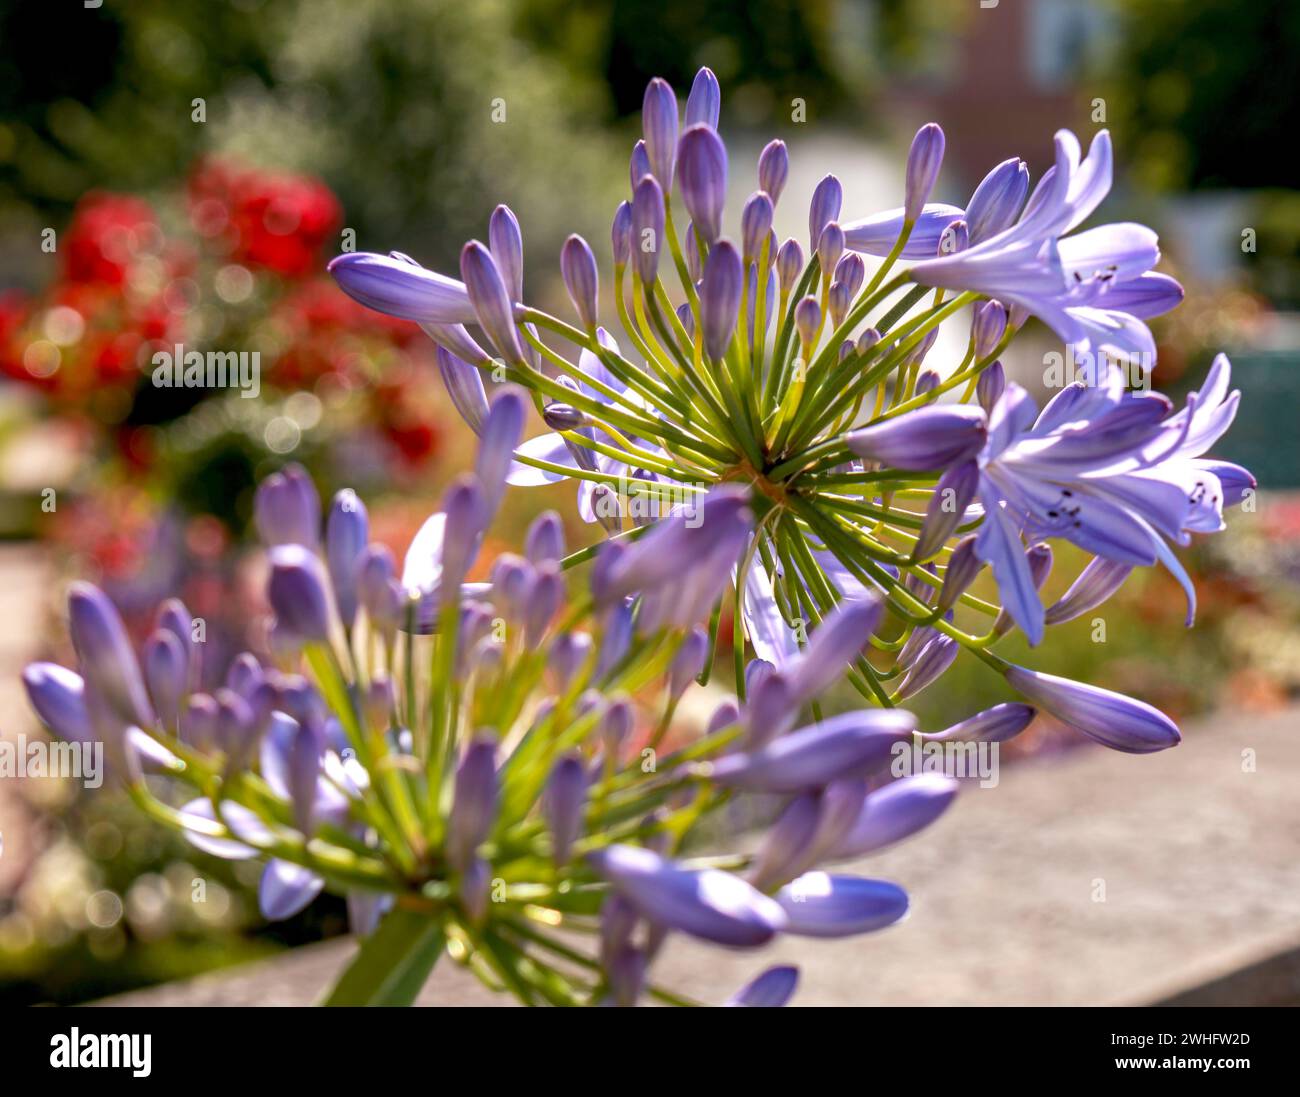 Agapanthus praecox - jewelry lily, blue ornamental lily, close-up, July Stock Photo